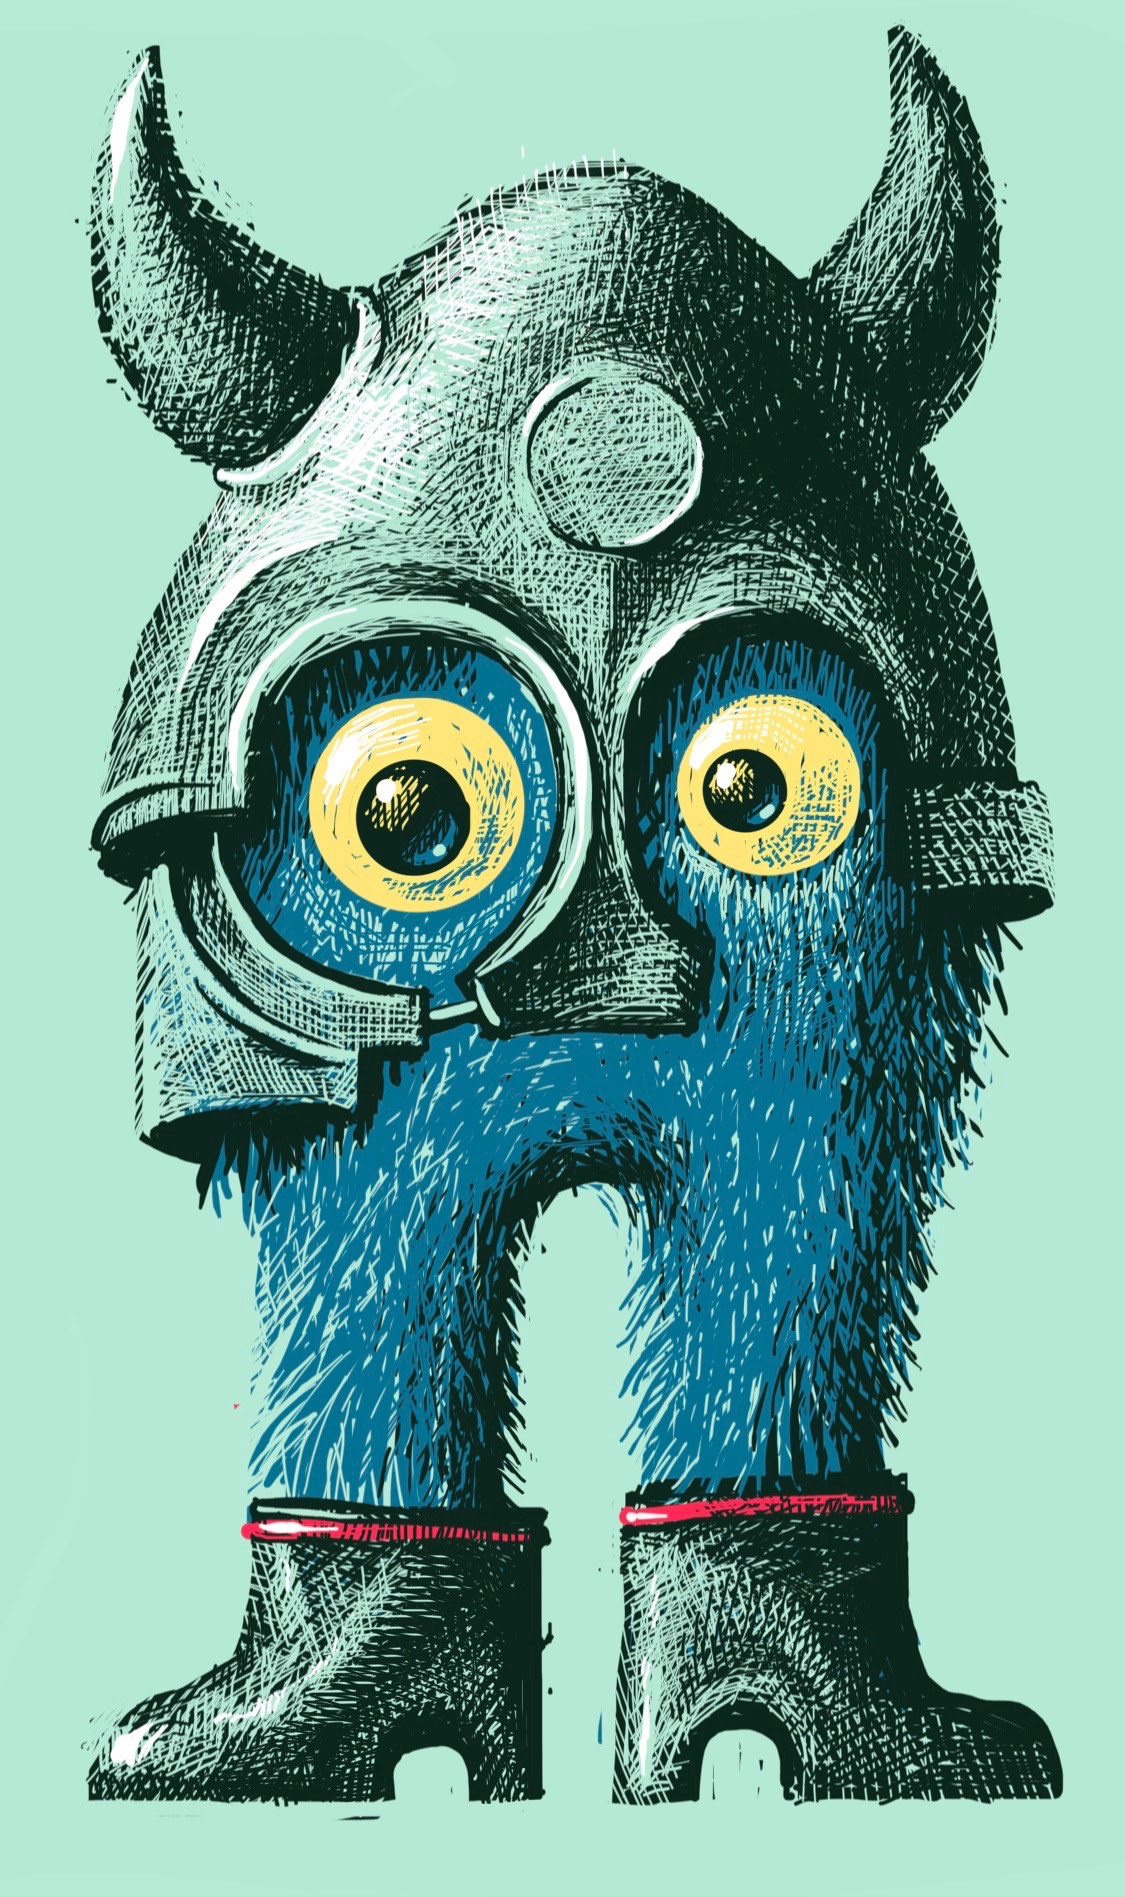 A blue furry creature wearing heavy leather boots and a Viking helmet